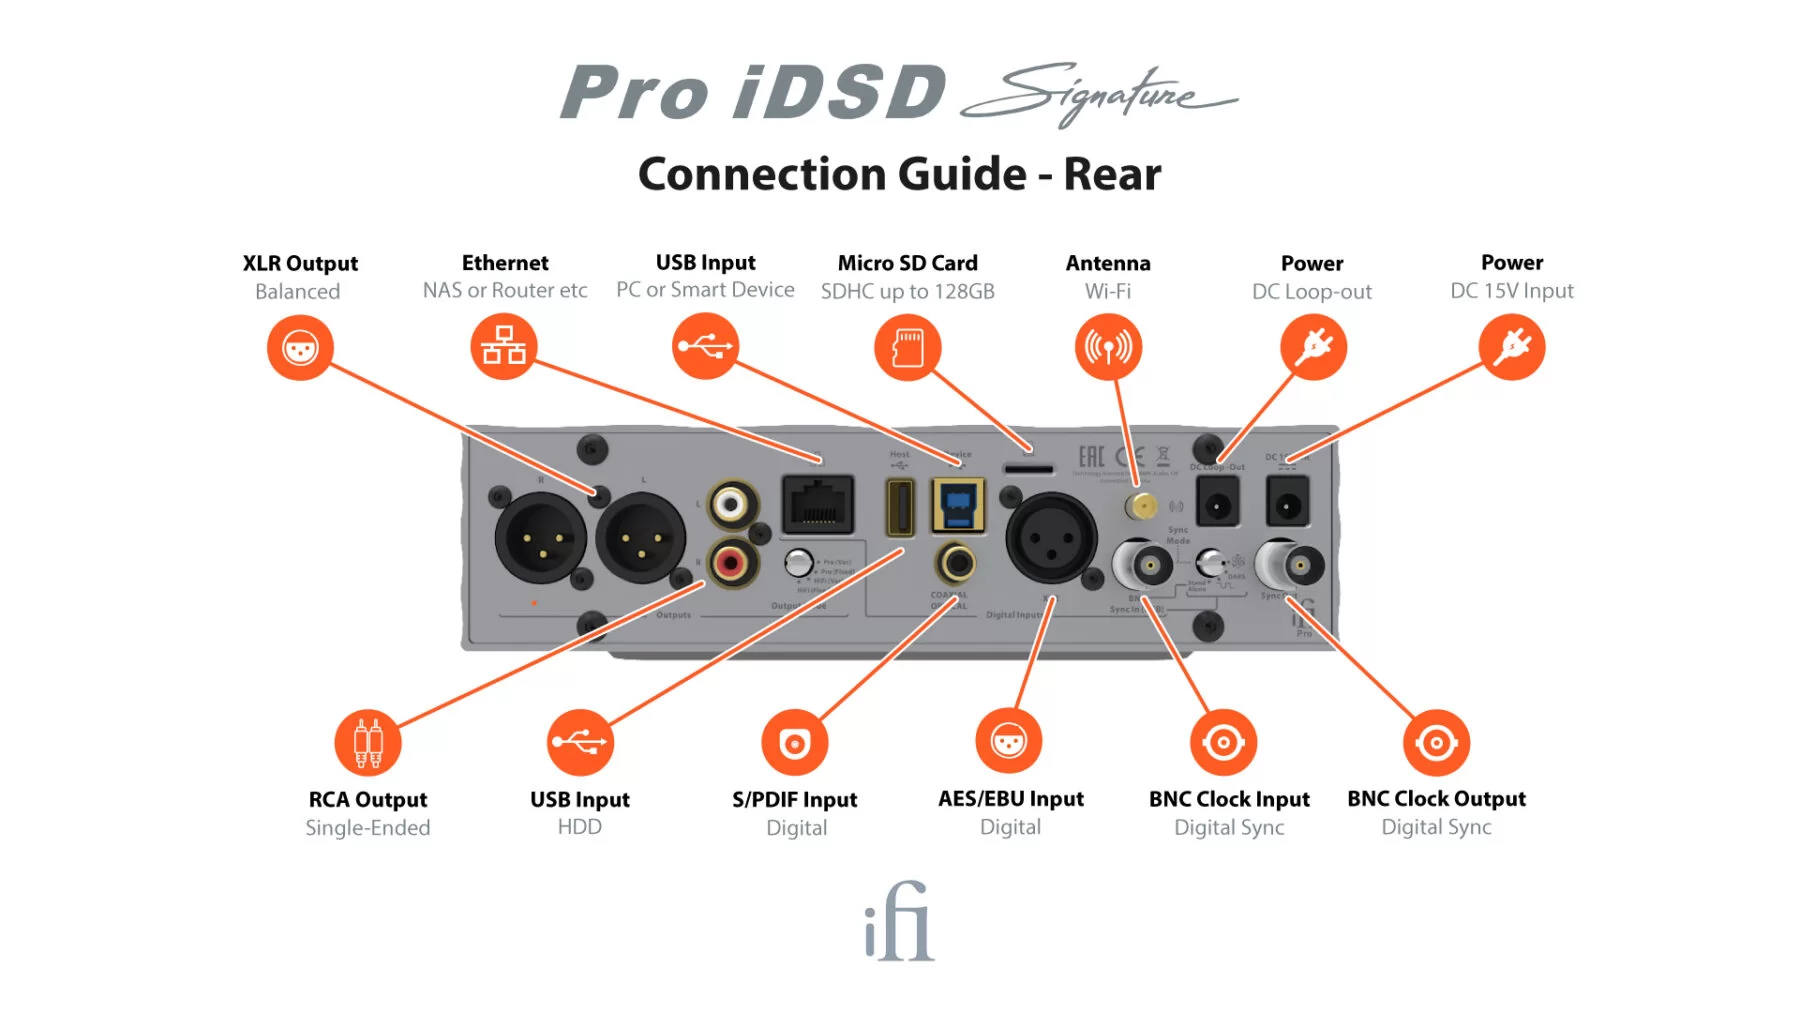 Pro iDSD Signature Connection Guide front banner